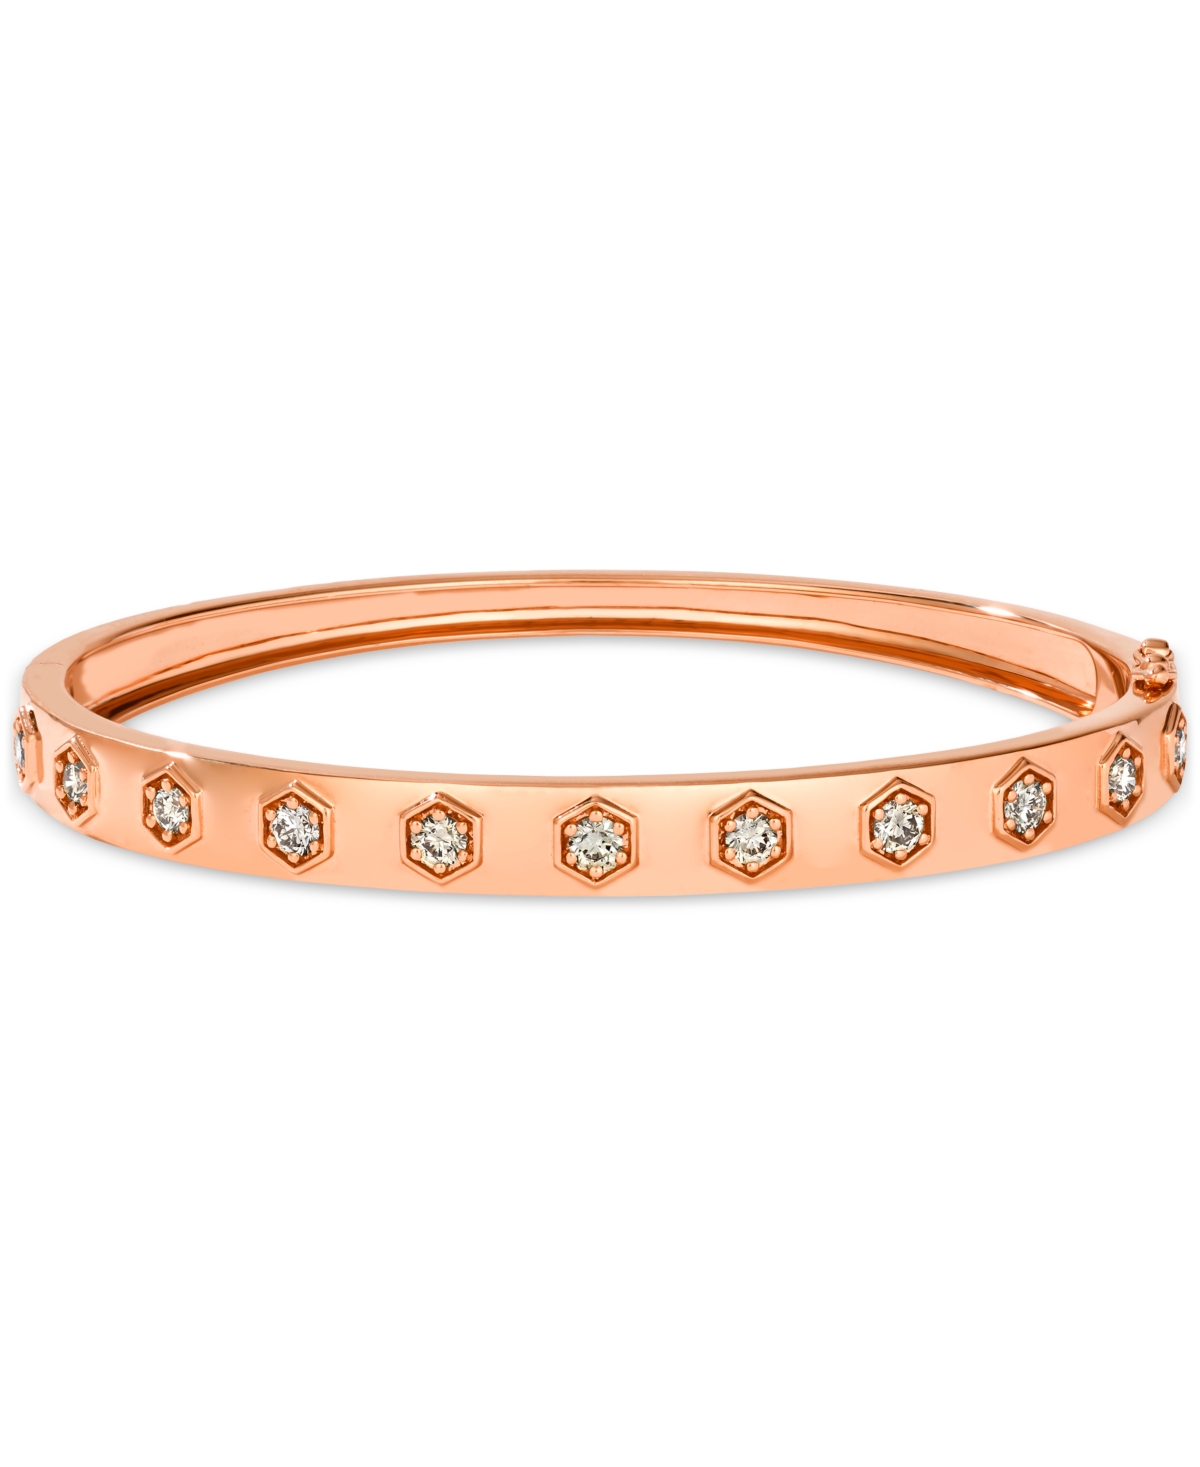 Le Vian Nude Diamond Bangle Bracelet (1 Ct. T.w.) In 14k Gold (also Available In Rose Gold Or White Gold)